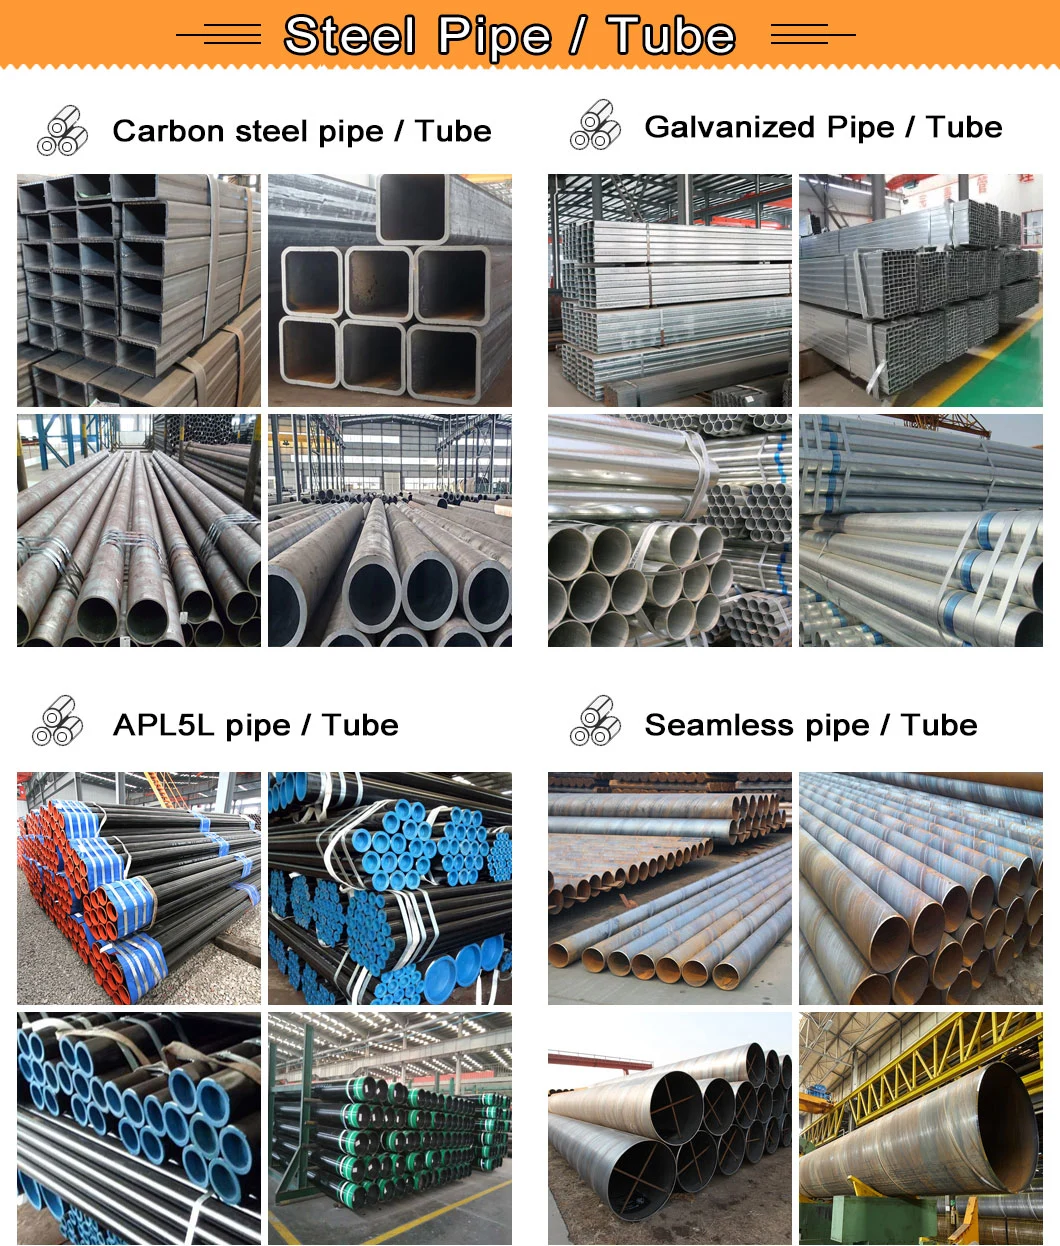 High Quality ASTM A500 Shs Rhs ASTM A500 Steel 100X100 Ms Galvanized Square Tube Hollow Section Rectangular Pipe Price List Prod High Quality Galvanized Square